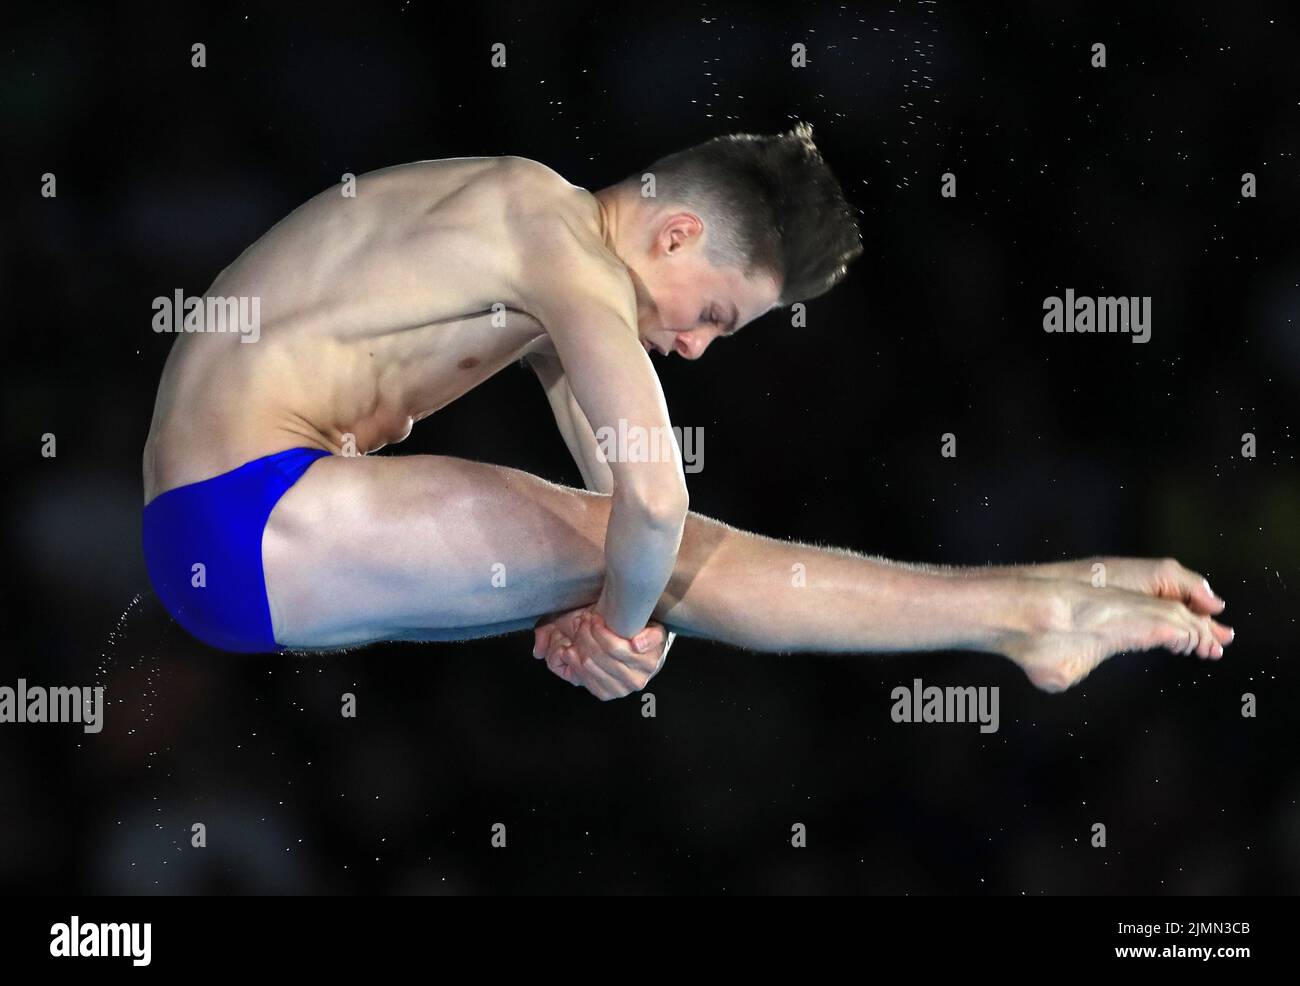 Scotland’s Angus Menmuir in action during the Men’s 10m Platform preliminary at Sandwell Aquatics Centre on day ten of the 2022 Commonwealth Games in Birmingham. Picture date: Sunday August 7, 2022. Stock Photo